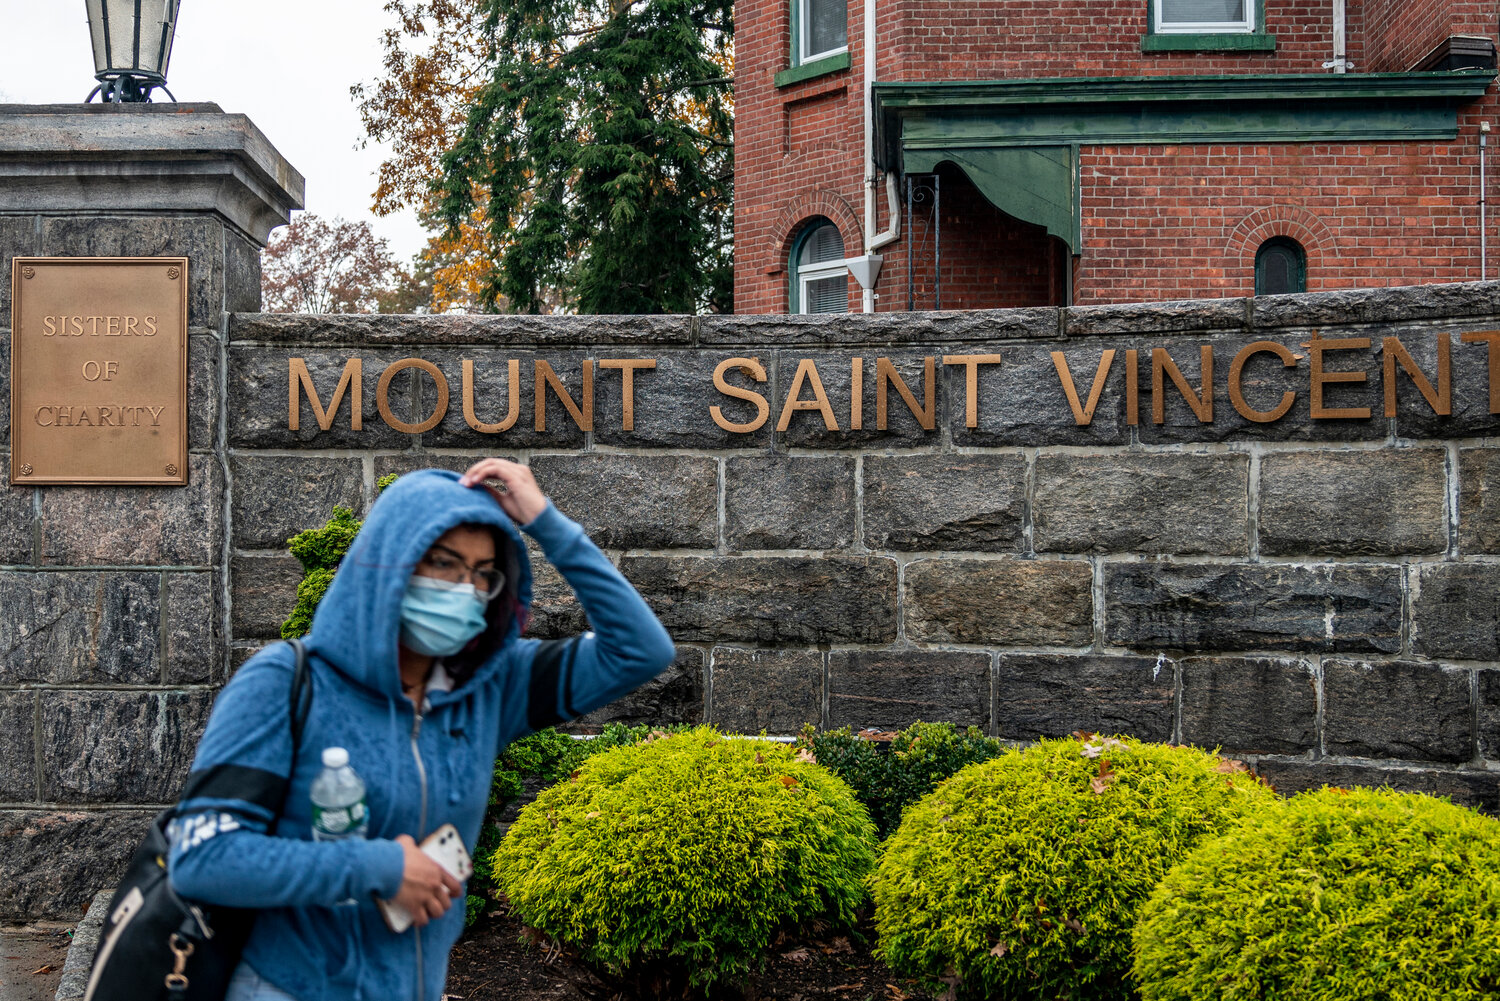 The College of Mount Saint Vincent will not be affected by the recent announcement that the Sisters of Charity will start a ‘path to completion.’ But at some point the convent and other Sisters of Charity buildings will close after the last sister leaves.